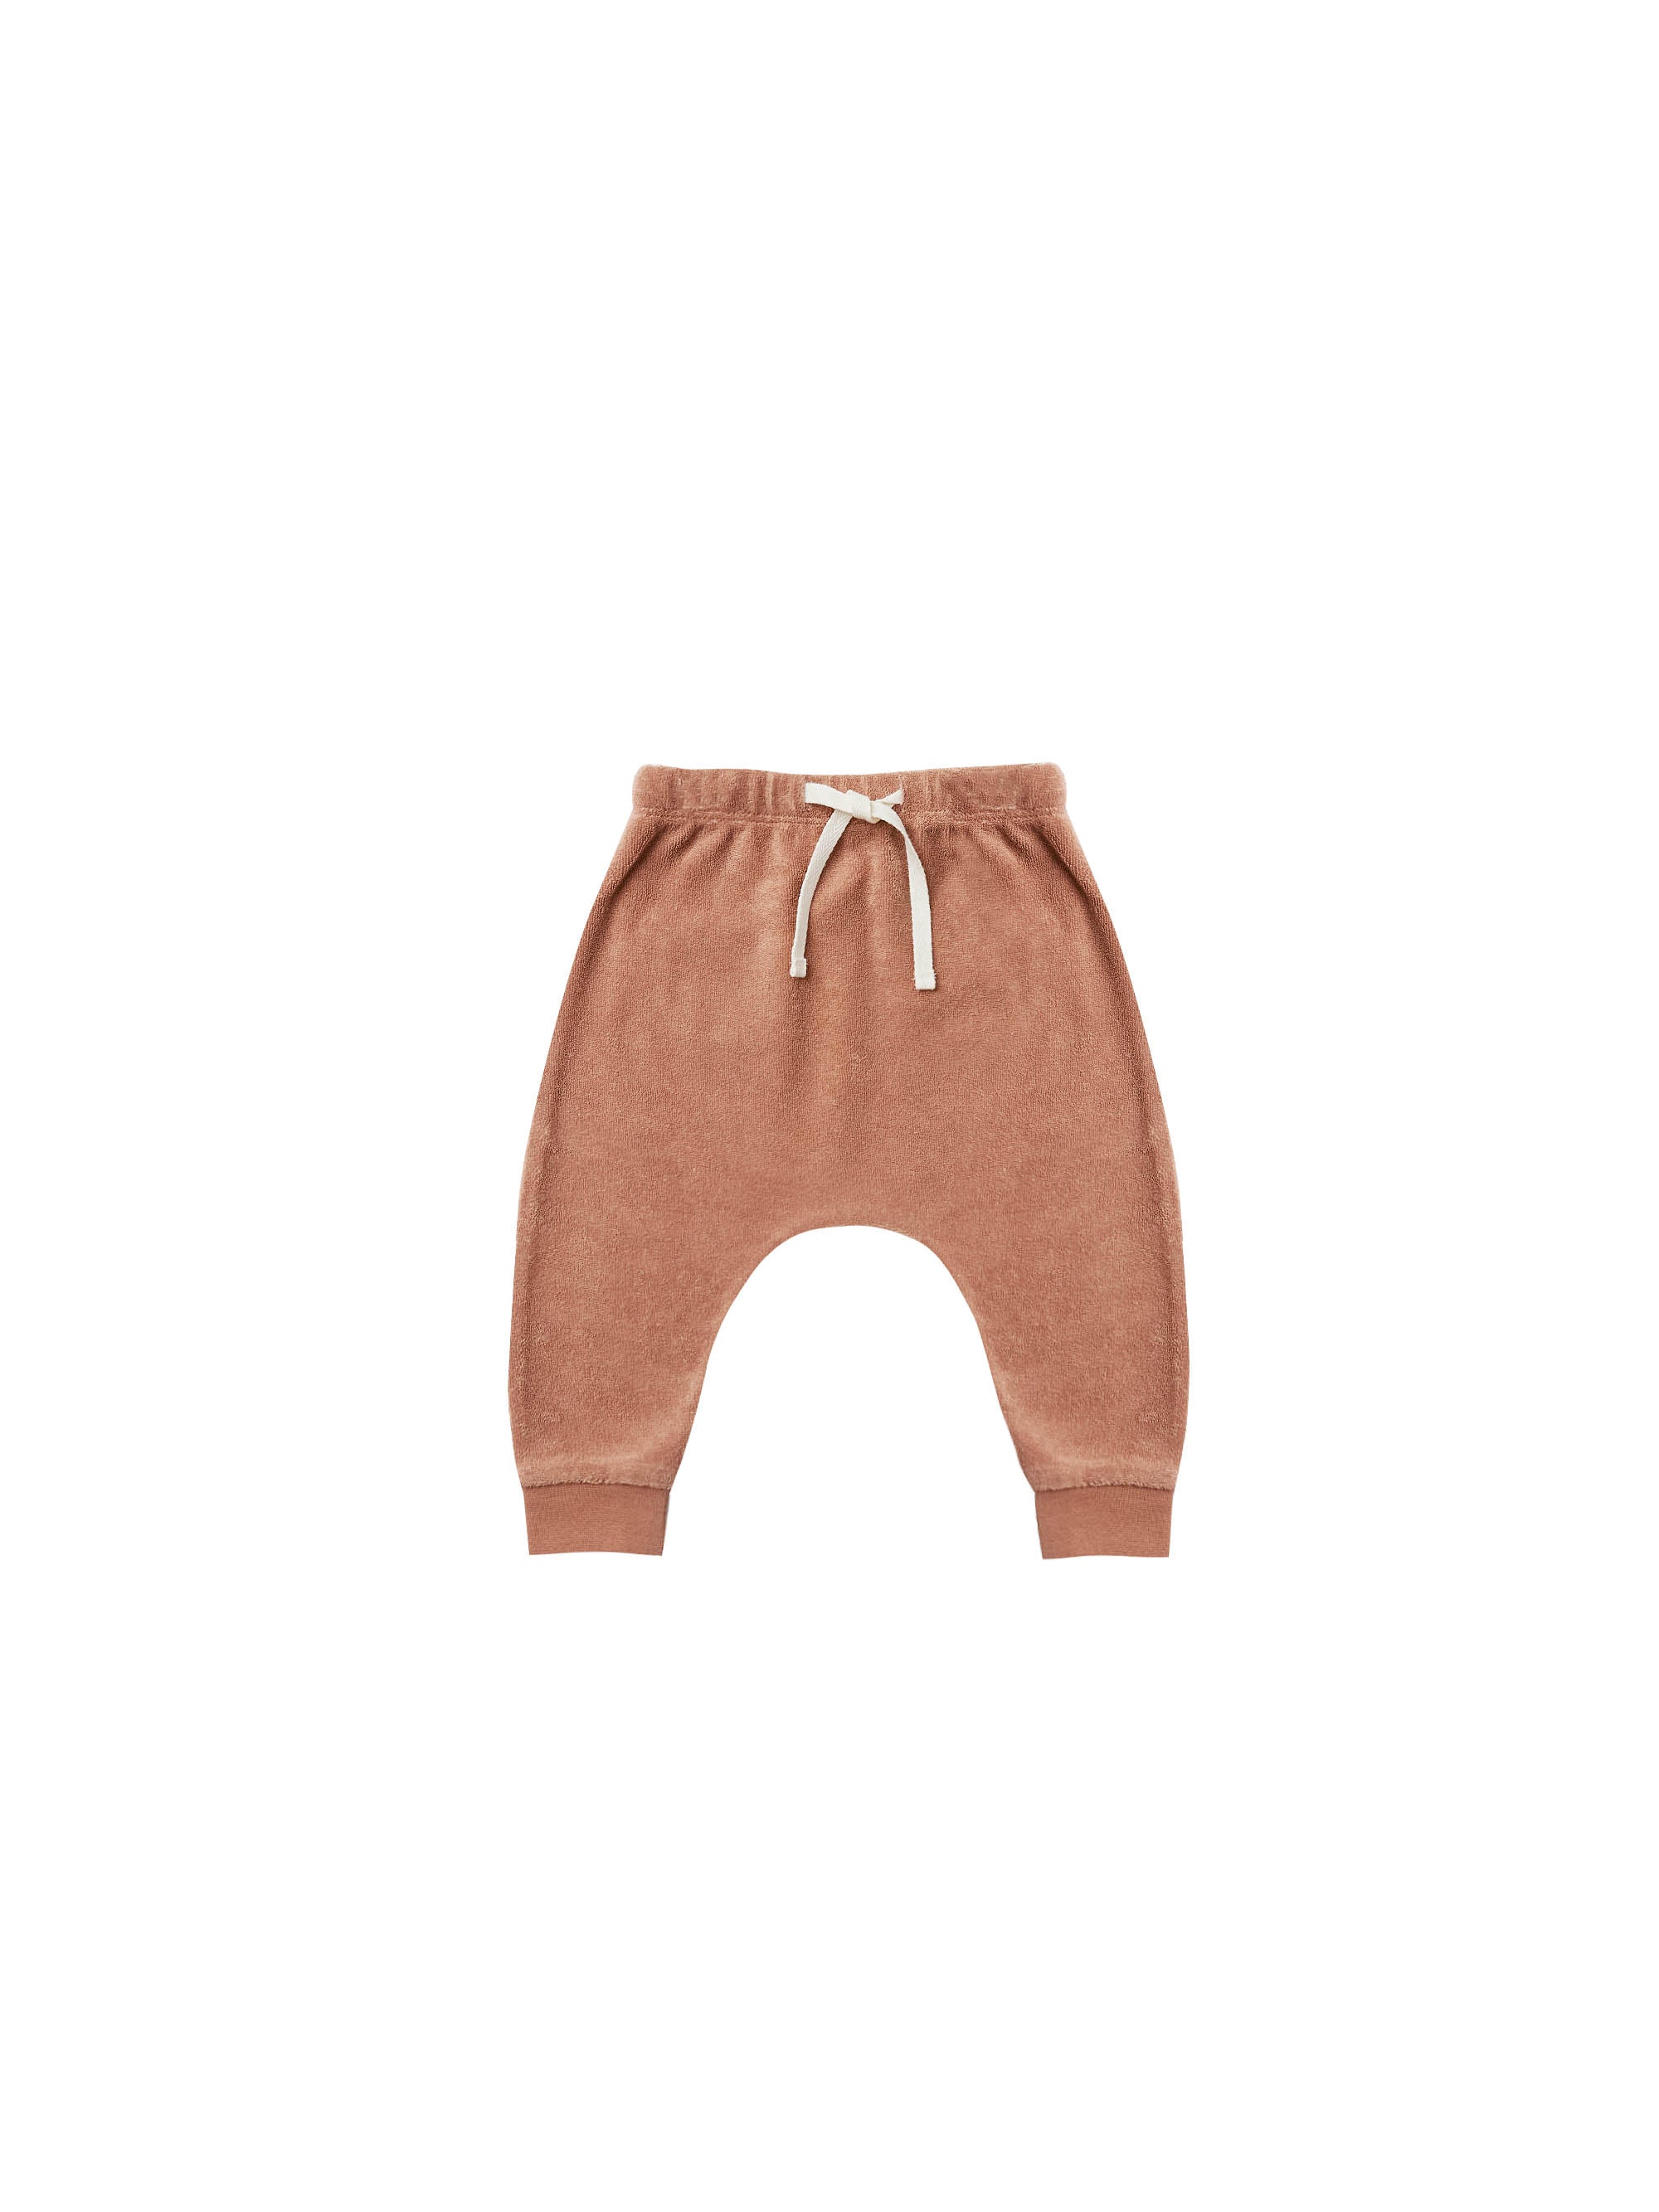 QUINCY MAE TERRY PANT / TERRACOTTA